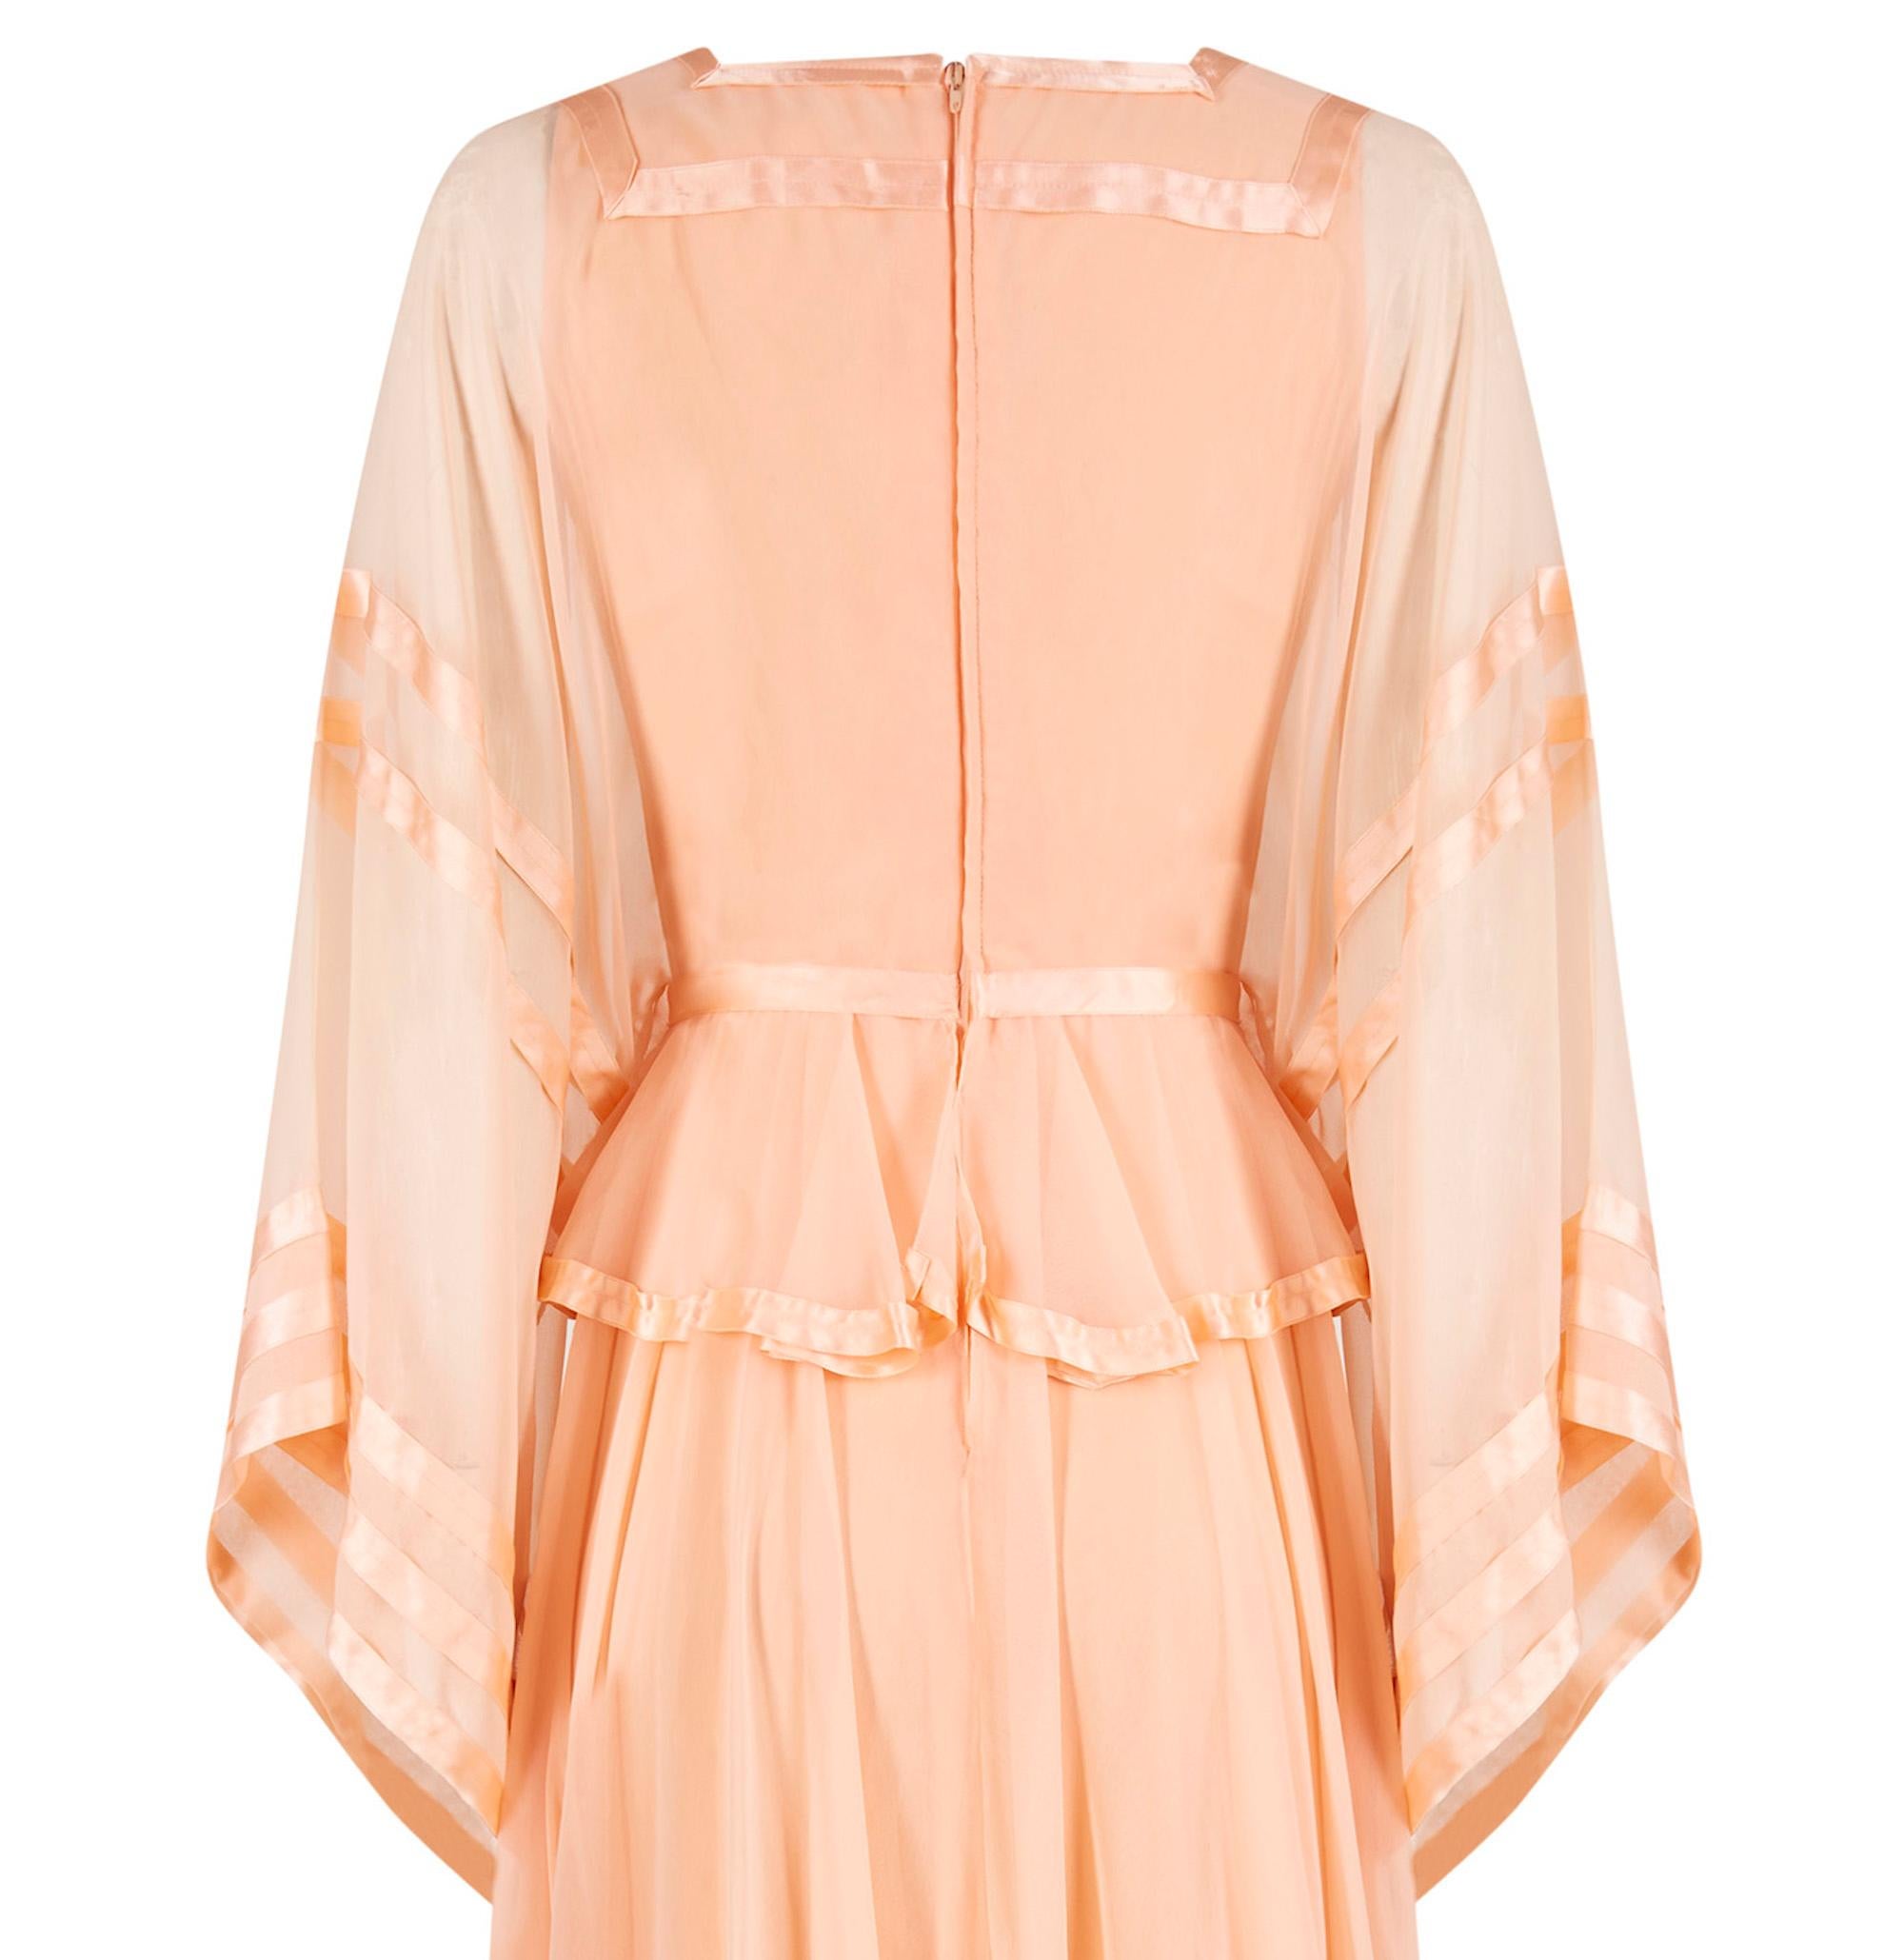 1970s Jean Varon Peach Chiffon Dress With Ribbon Trim In Excellent Condition For Sale In London, GB